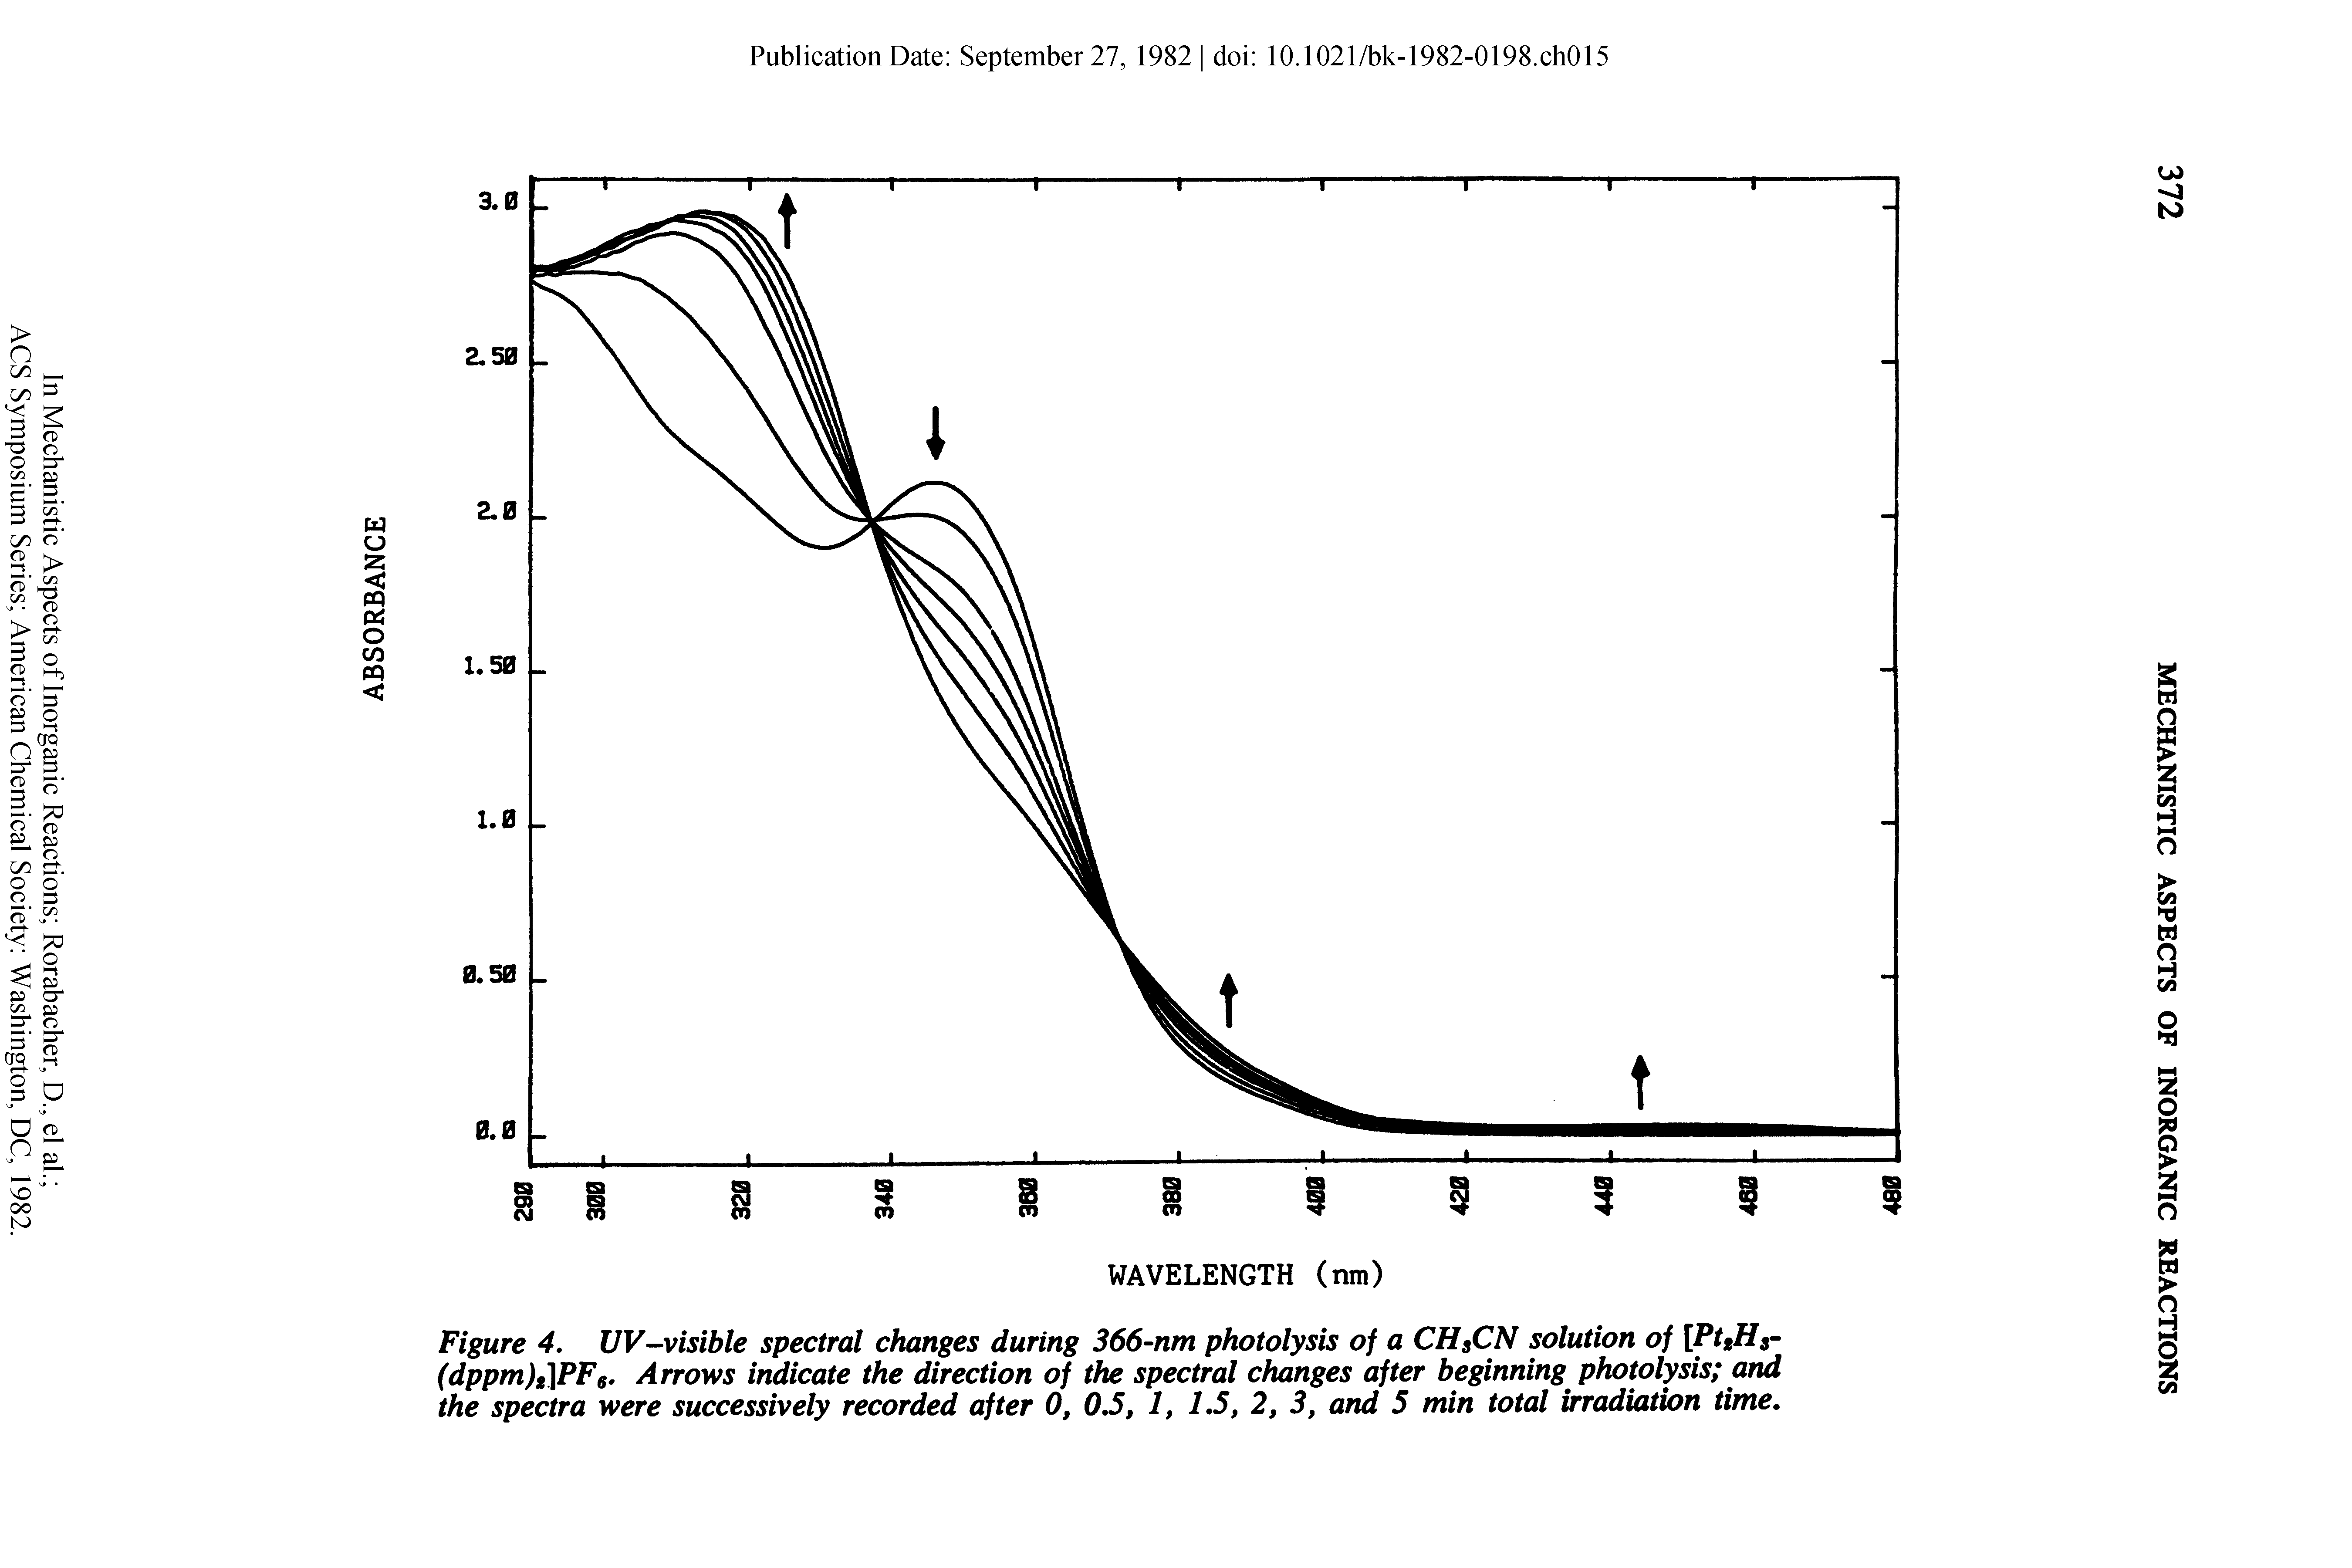 Figure 4. UV-visible spectral changes during 366-nm photolysis of a CHSCN solution of [PtgHs-(dppm)i PF6. Arrows indicate the direction of the spectral changes after beginning photolysis and the spectra were successively recorded after 0, 0.5, 1, 1.5, 2, 3, and 5 min total irradiation time.